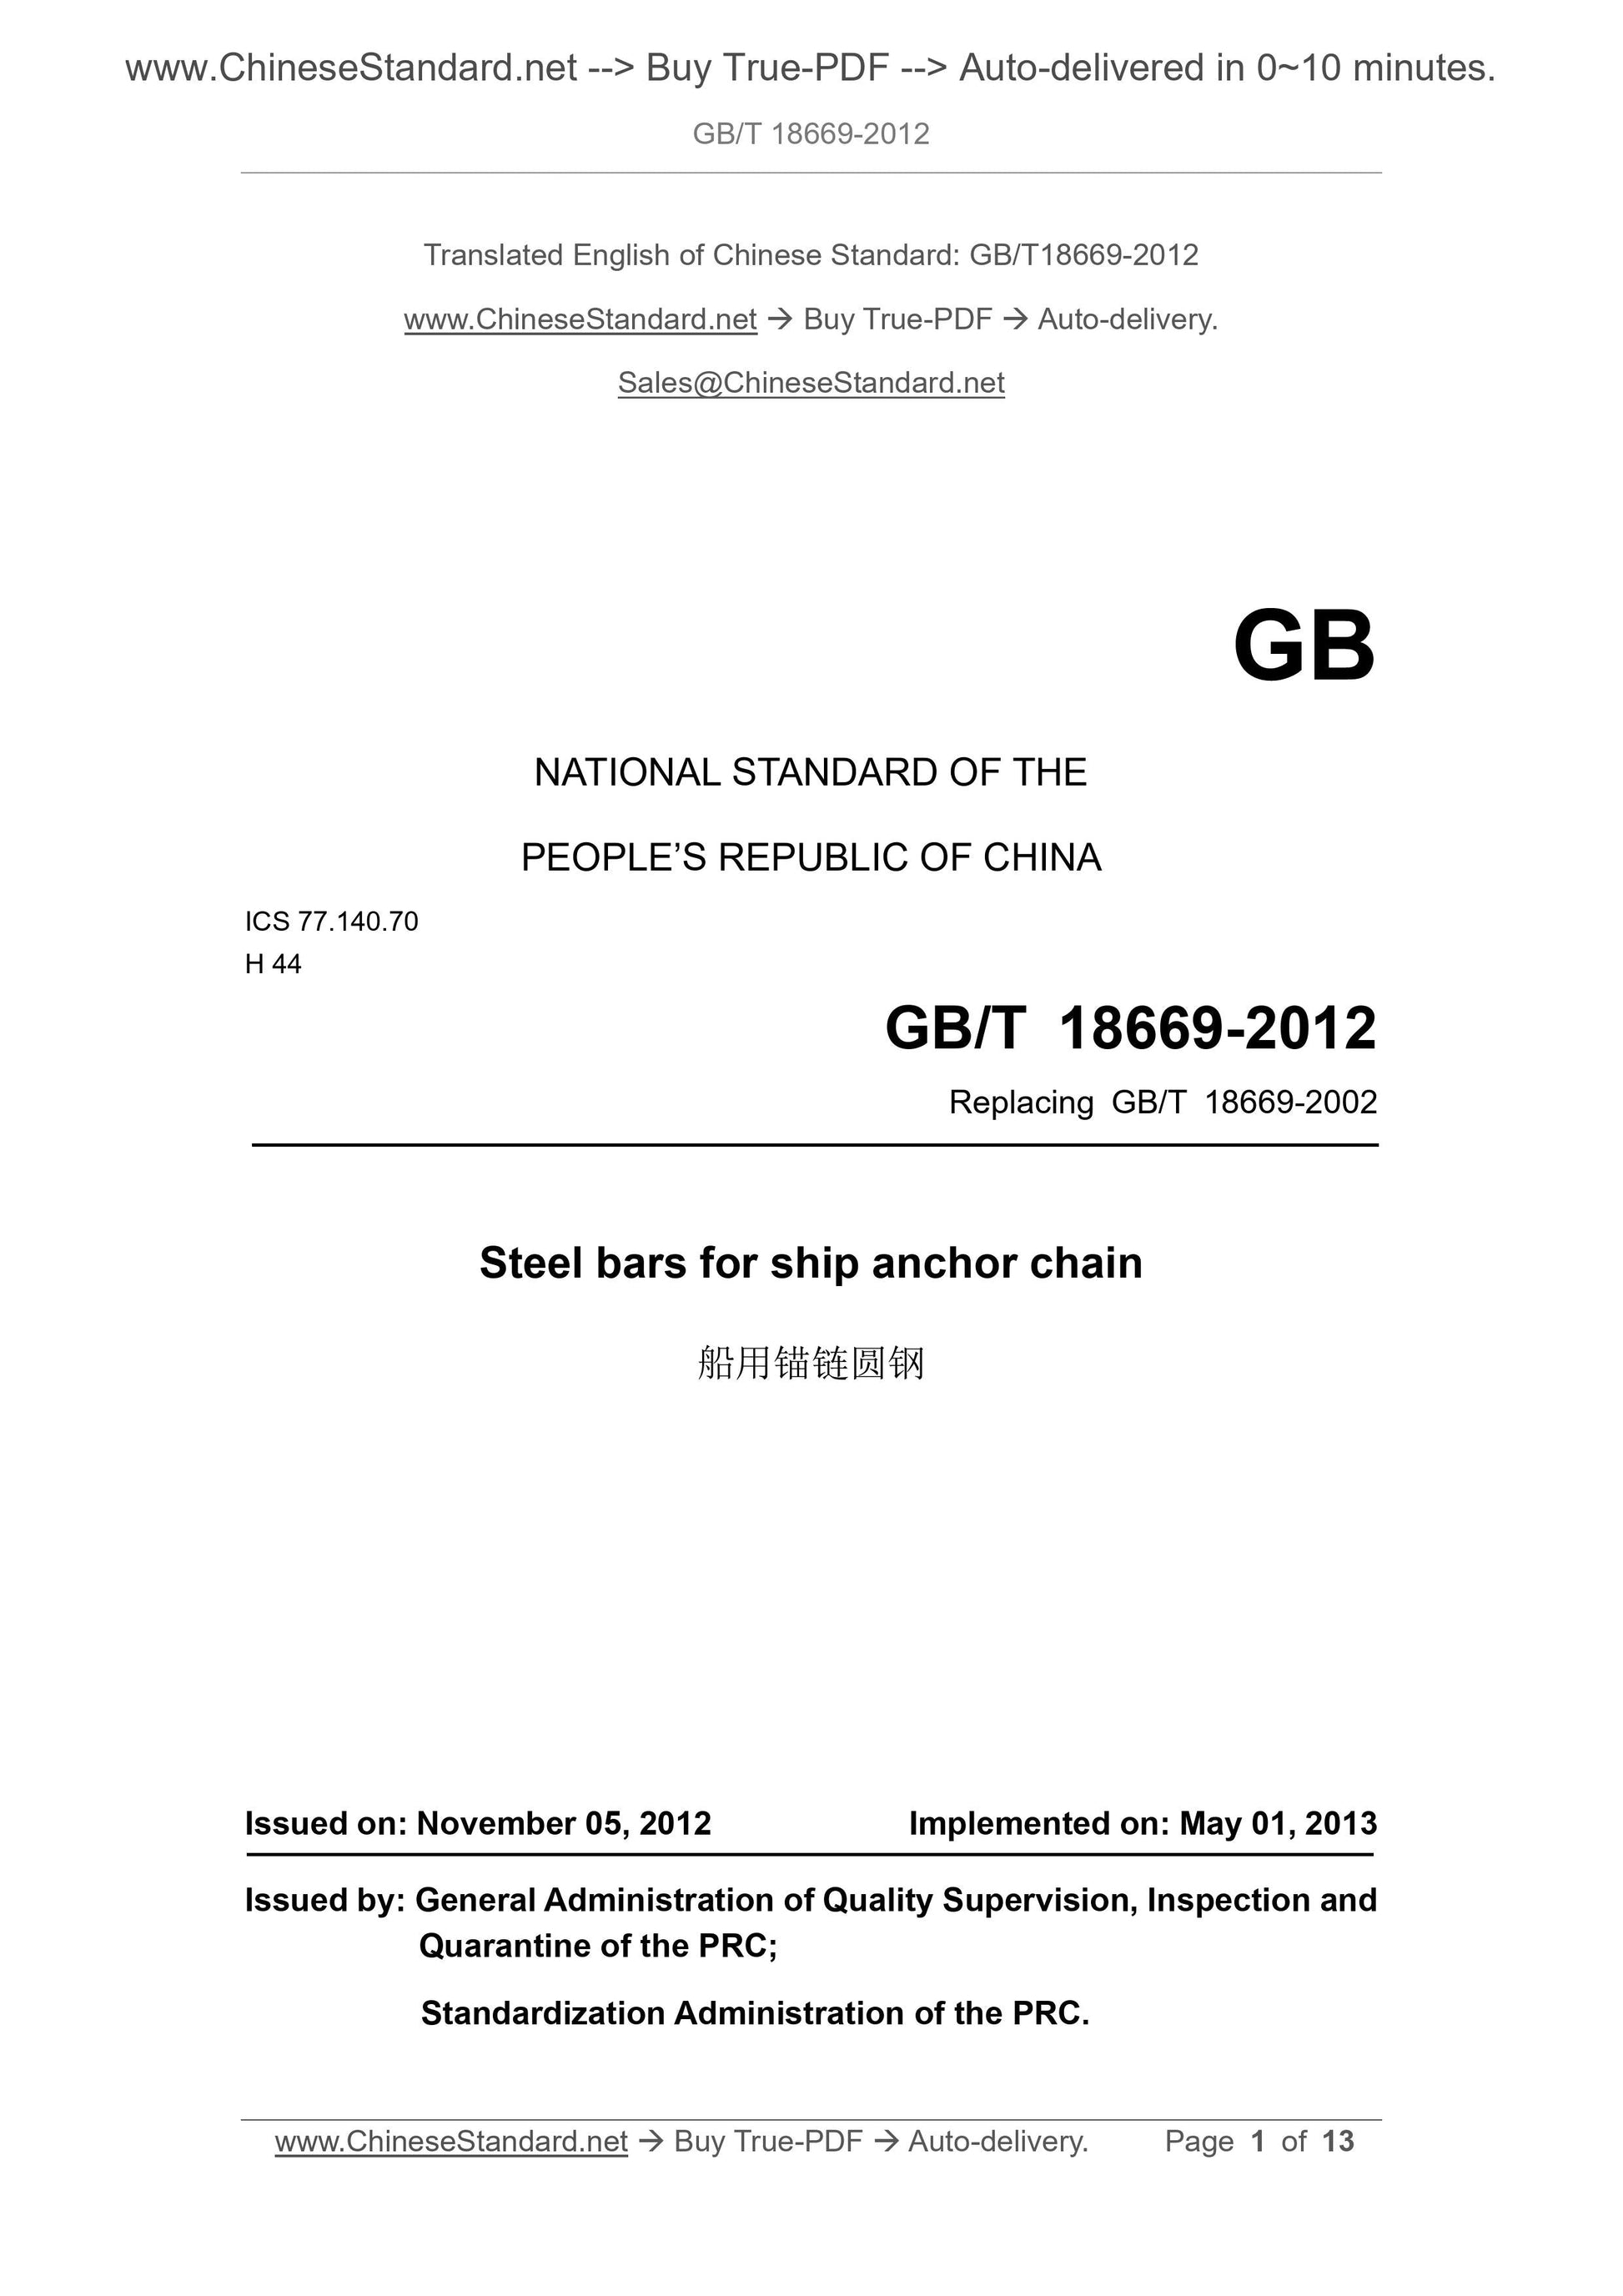 GB/T 18669-2012 Page 1